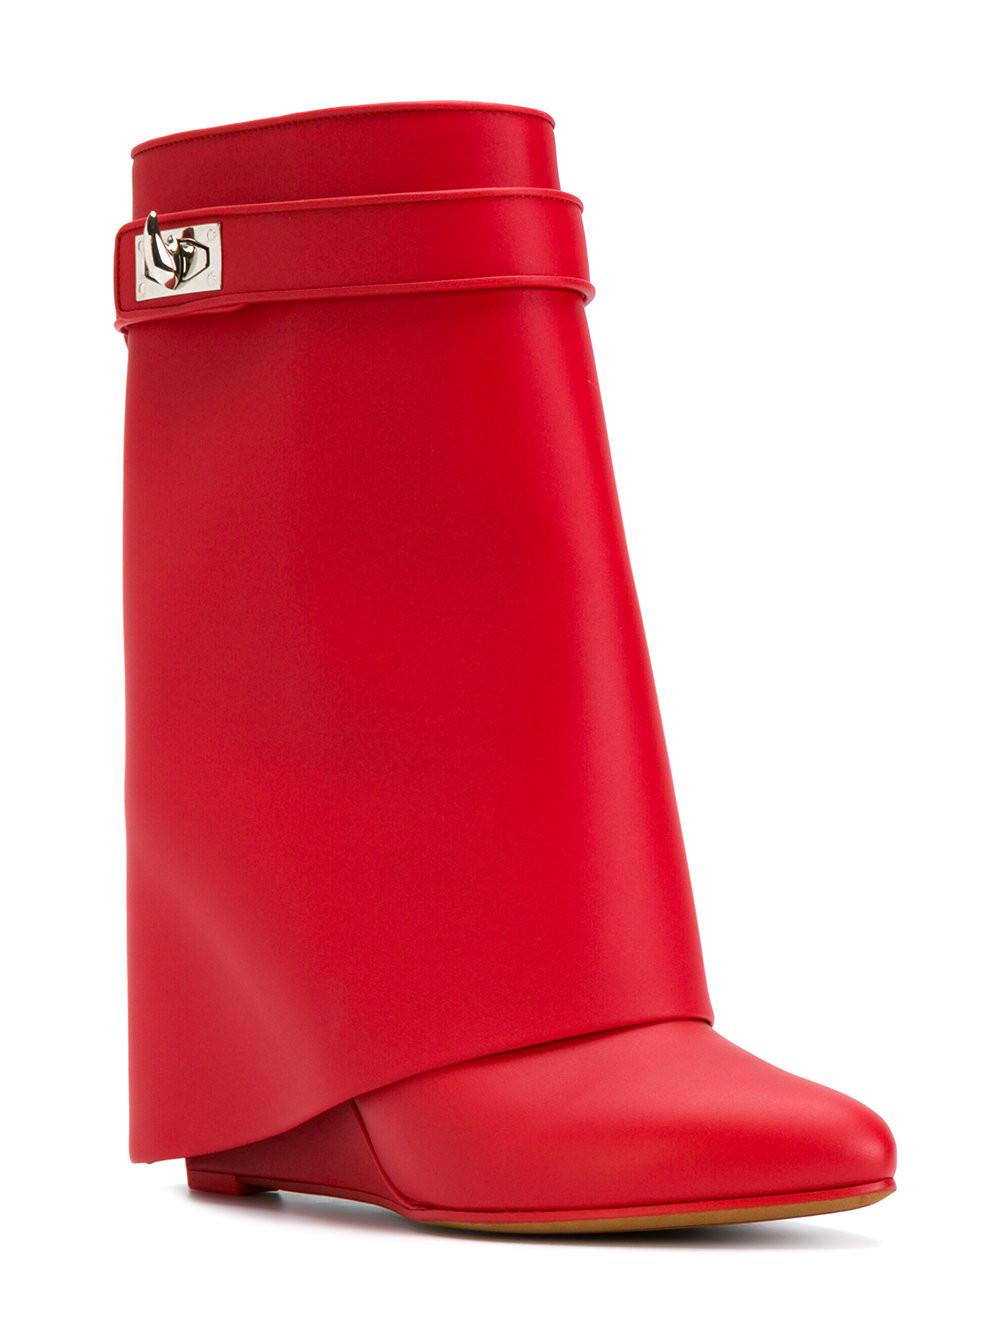 Givenchy Leather Shark Lock Boots in Red - Lyst